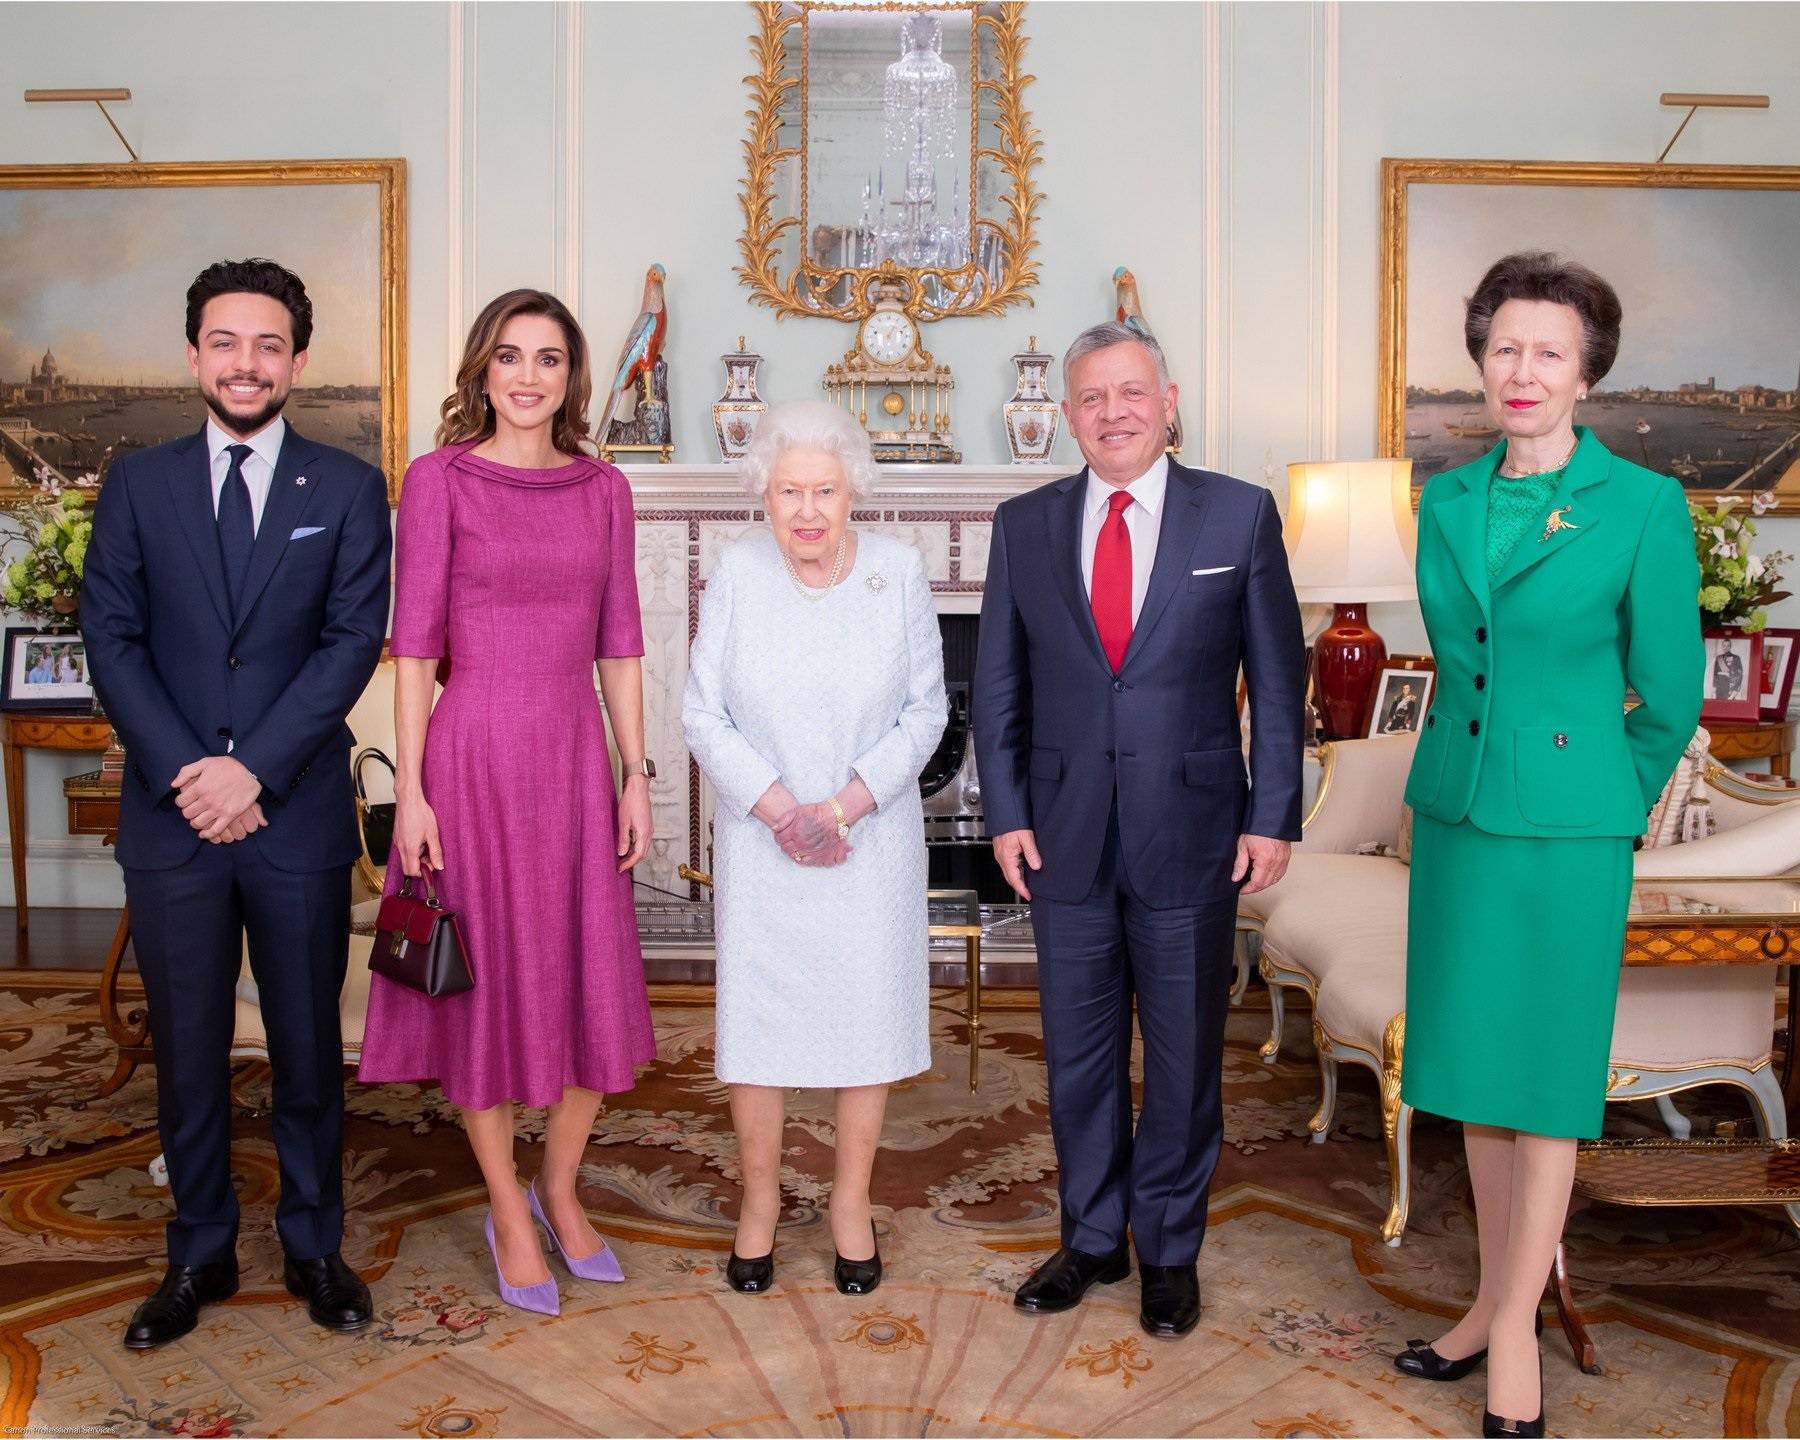 Their Majesties King Abdullah II and Queen Rania, Her Majesty Queen Elizabeth II, HRH Crown Prince Al Hussein and HRH Princess Anne at Buckingham Palace.